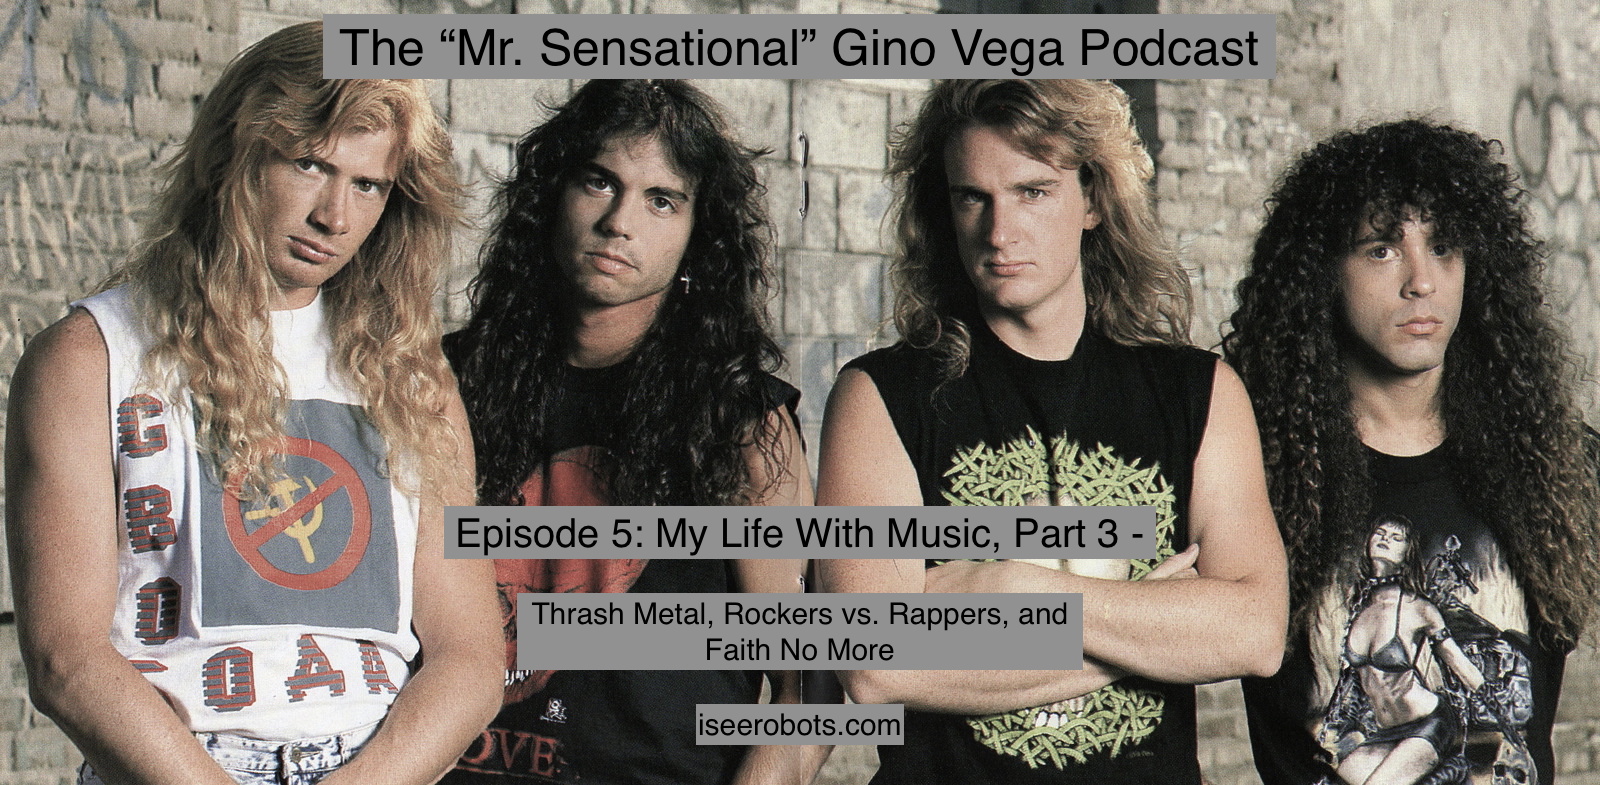 The Mr. Sensational Gino Vega Podcast Ep.5: My Life With Music Part 3. Thrash Metal, Rockers Vs. Rappers and Faith No More. 